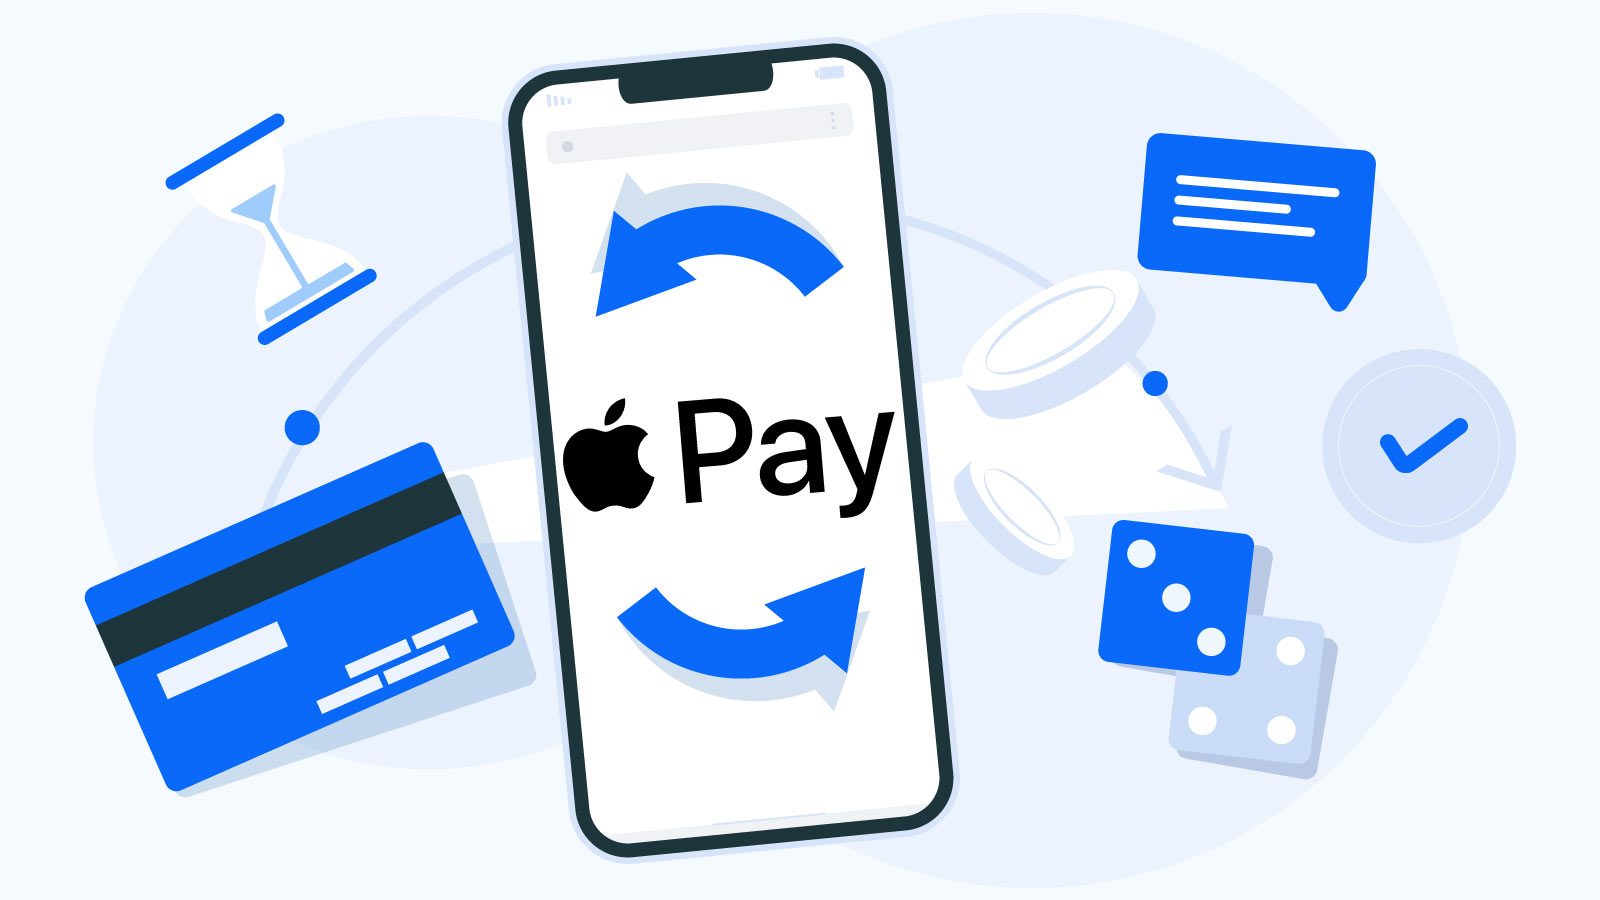 What is Apple Pay & how does it work